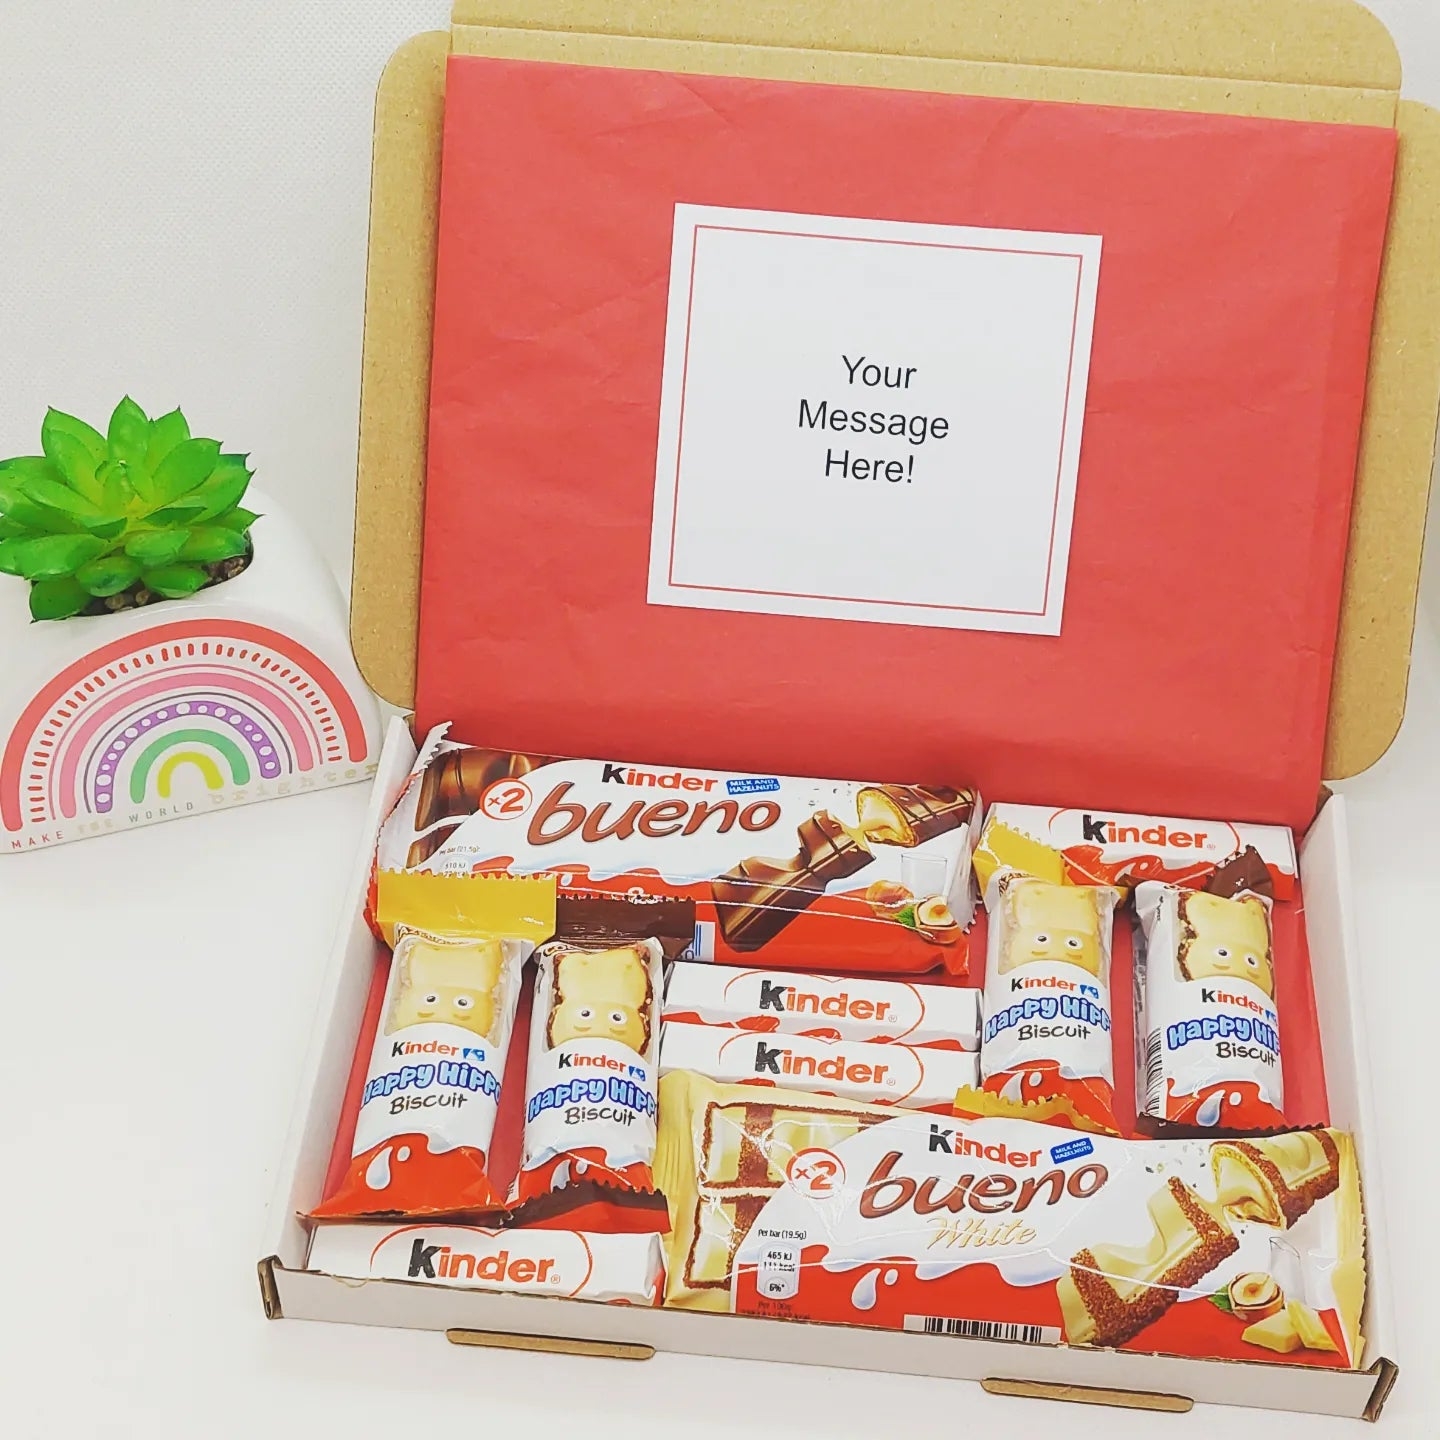 The Kinder Chocolate Letterbox Gift